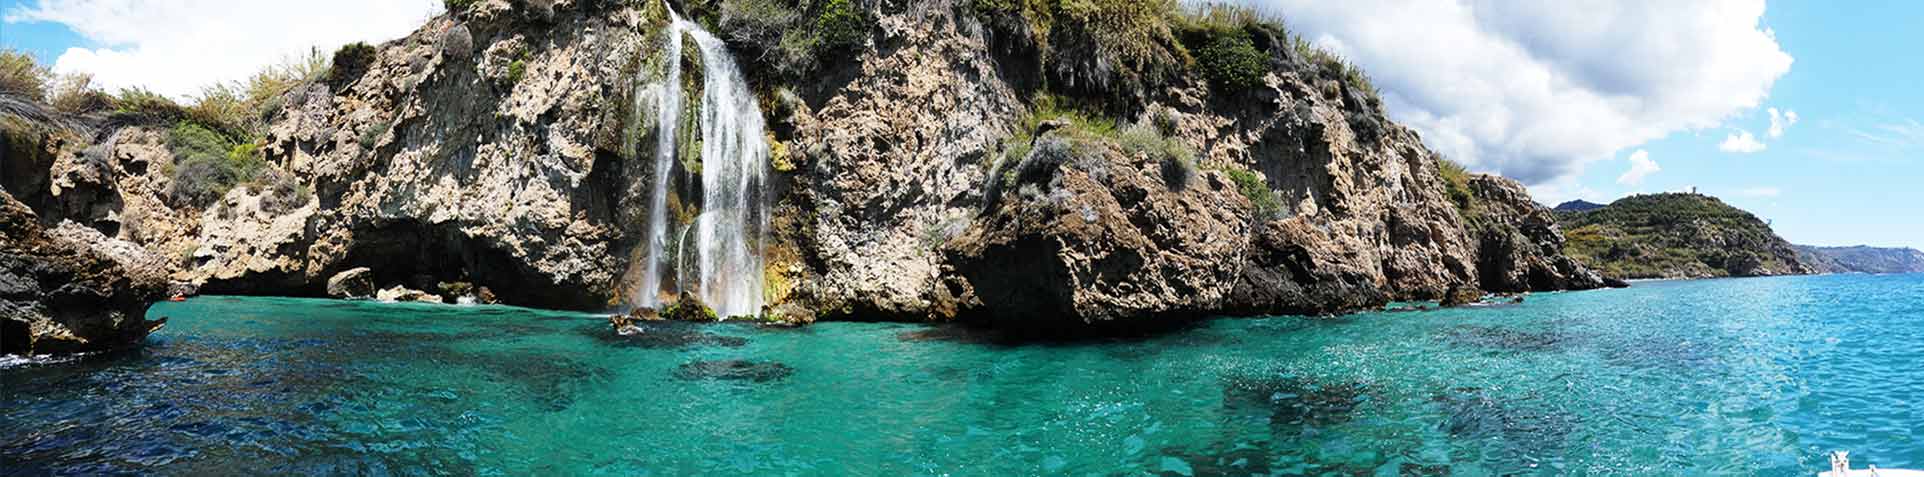 Exclusive Private 3 hour Sightseeing Boat Trip to Maro Waterfalls